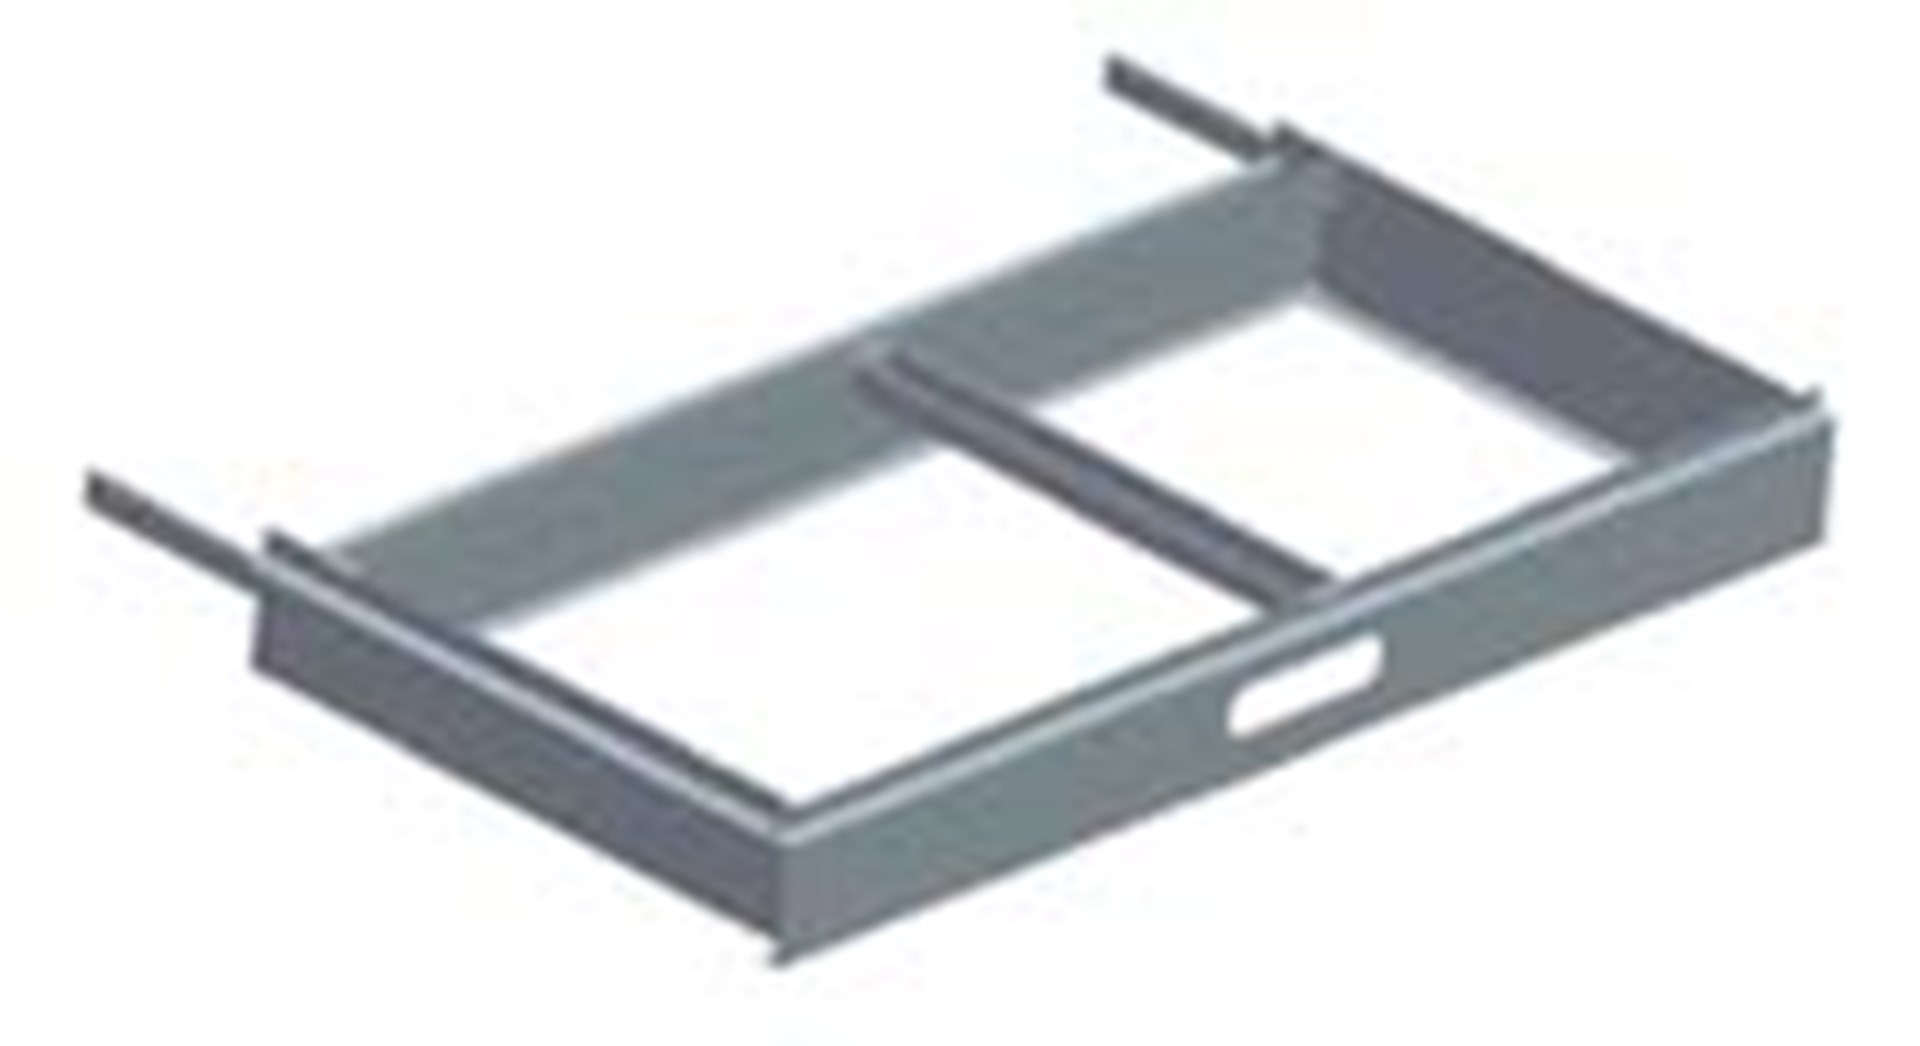 Pull-out frame with divider, suitable for hanging files. Can be mounted on different cabinet models.